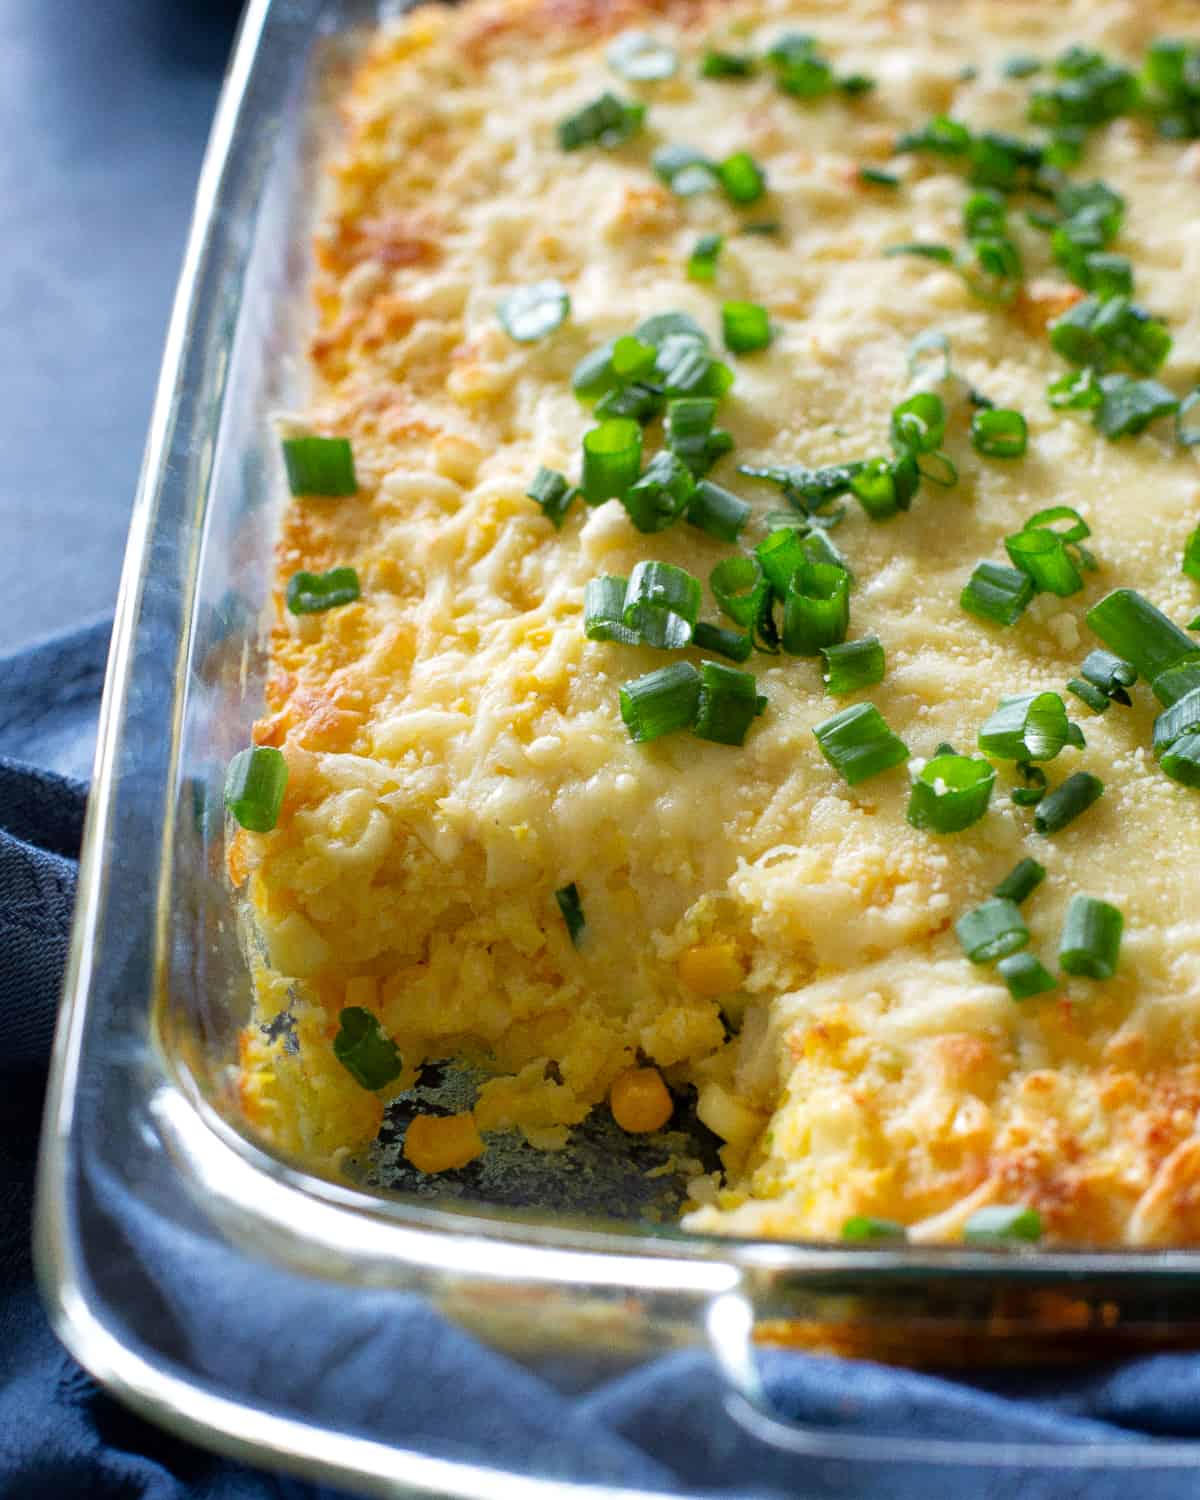 Tacky Corn Casserole – The Woman Who Ate All the pieces